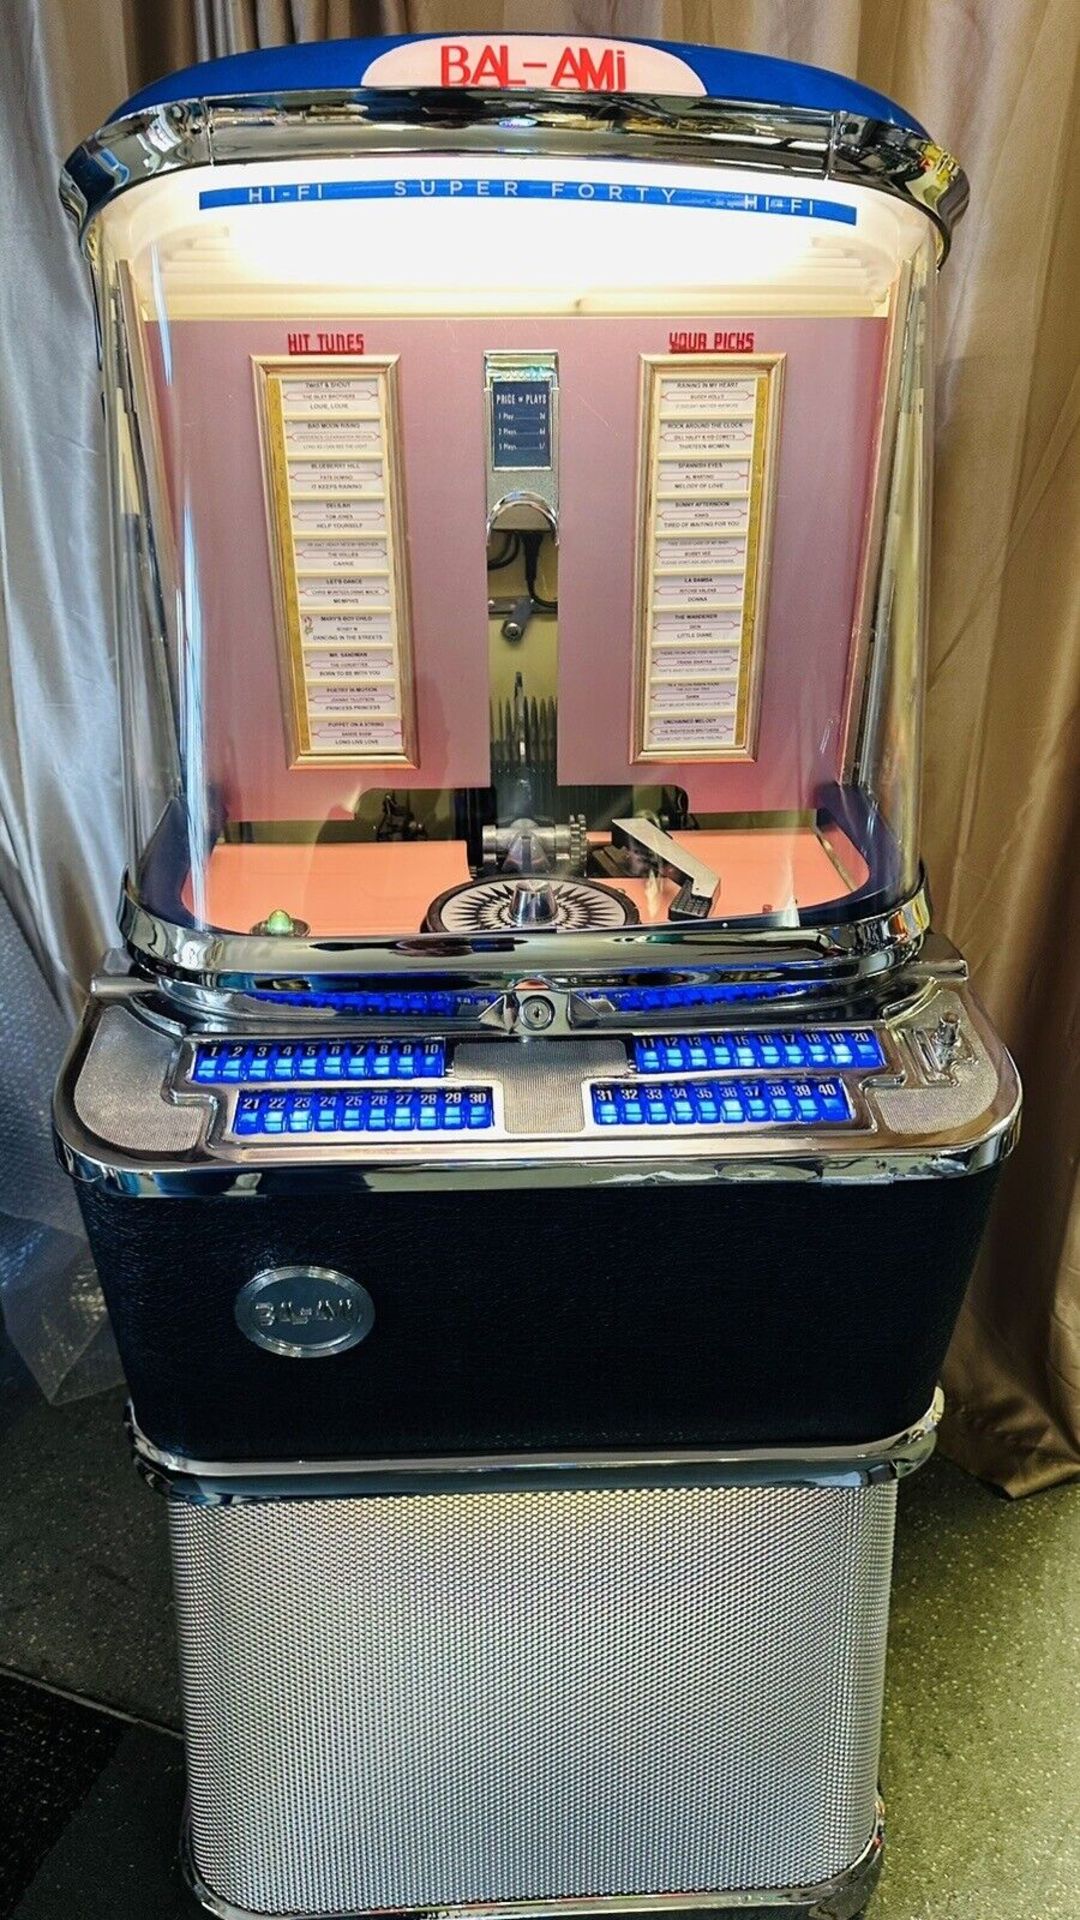 1957 FULLY Restored Bal Ami Super 40 Jukebox   This is a beautiful little machine and holds 20 7” - Image 8 of 8